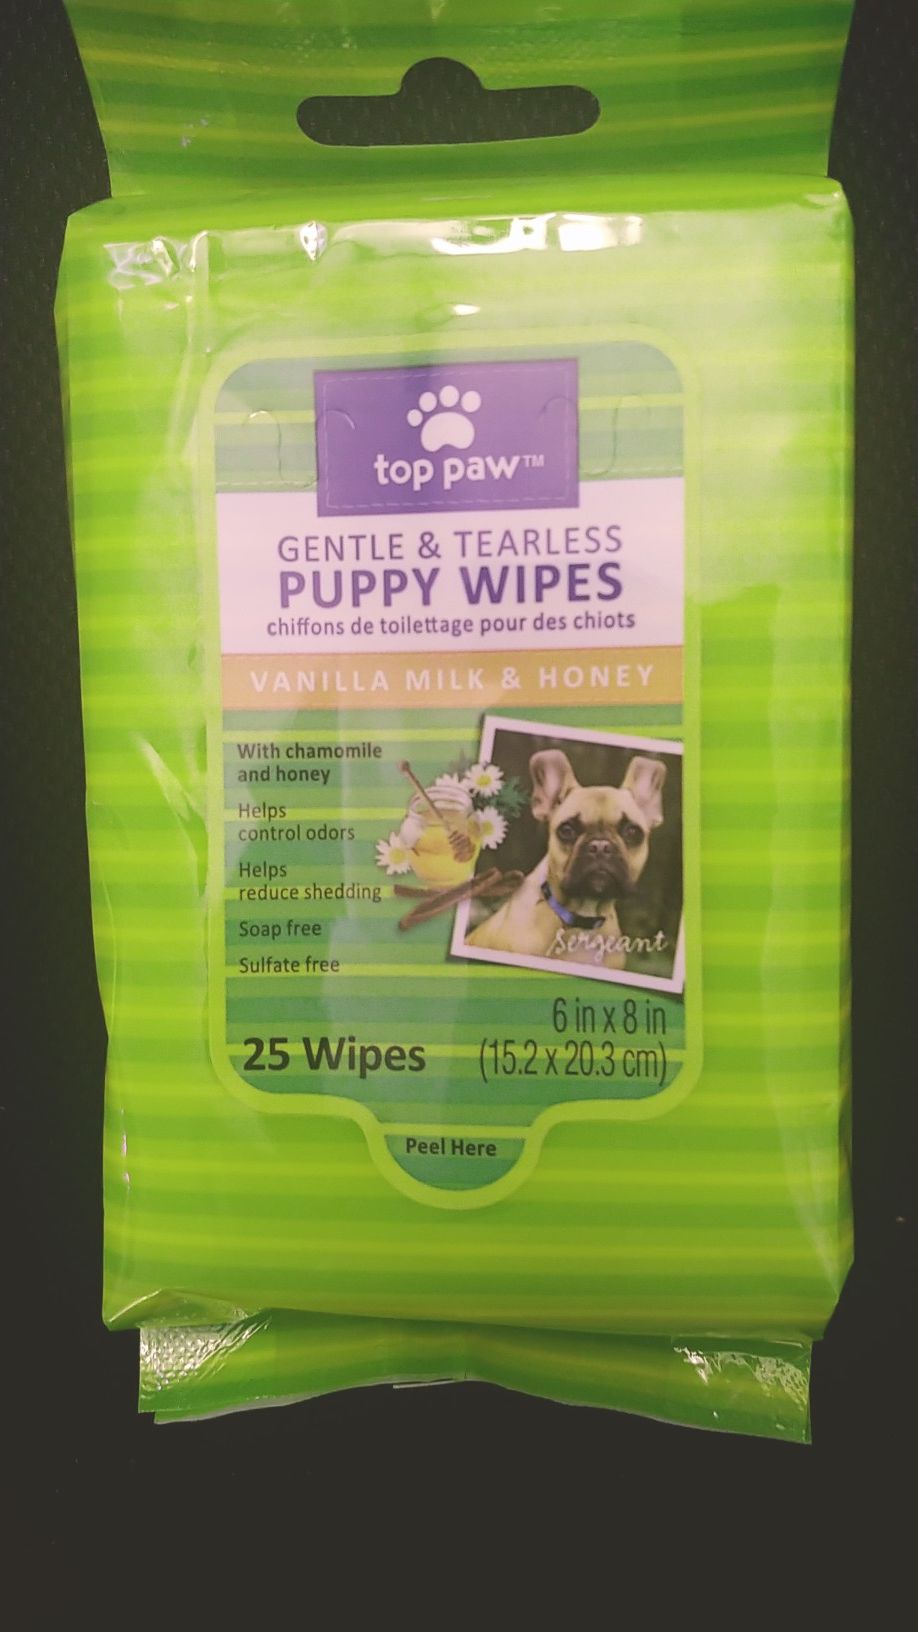 Top Paw Puppy Wipes 3 packs